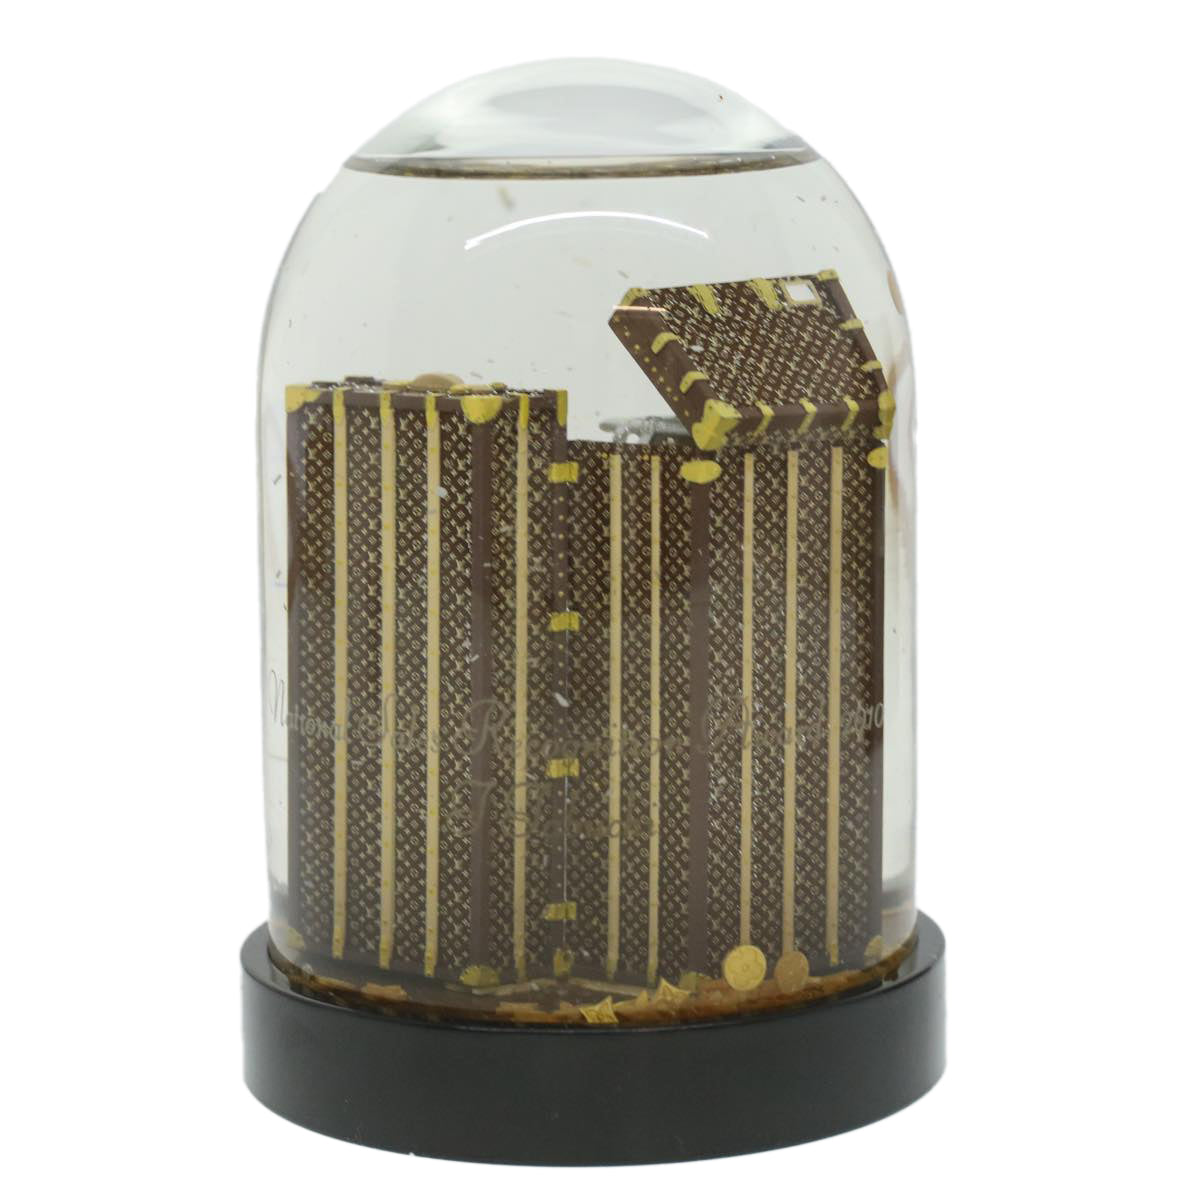 LOUIS VUITTON Wardrobe Trunk Snow Globe 2009 limited year Clear LV Auth 37516